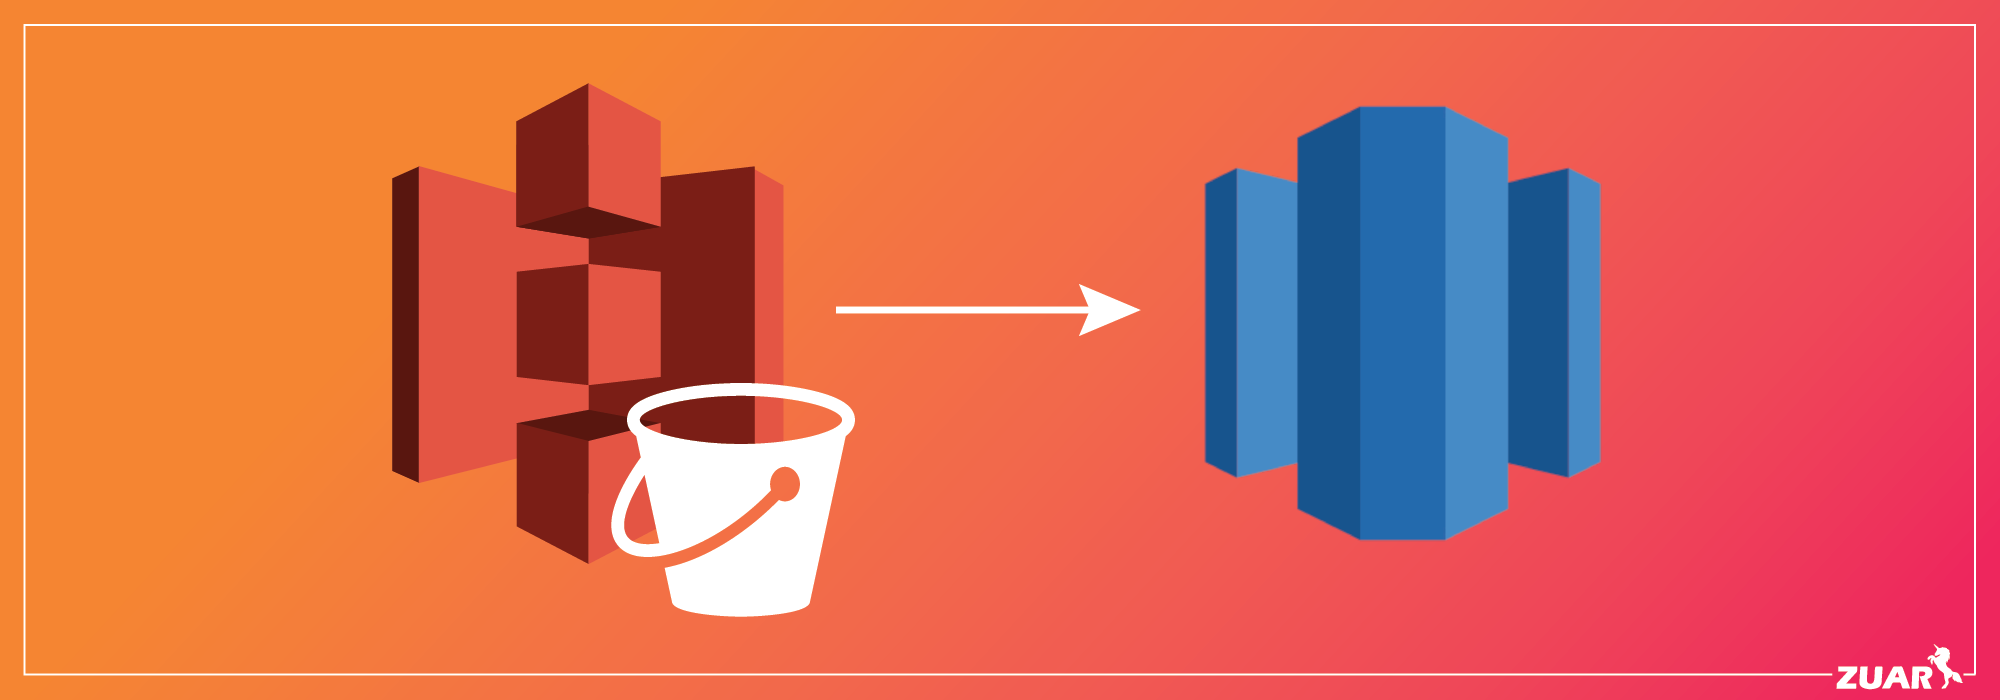 How to Load Data From an Amazon S3 Bucket Into Redshift